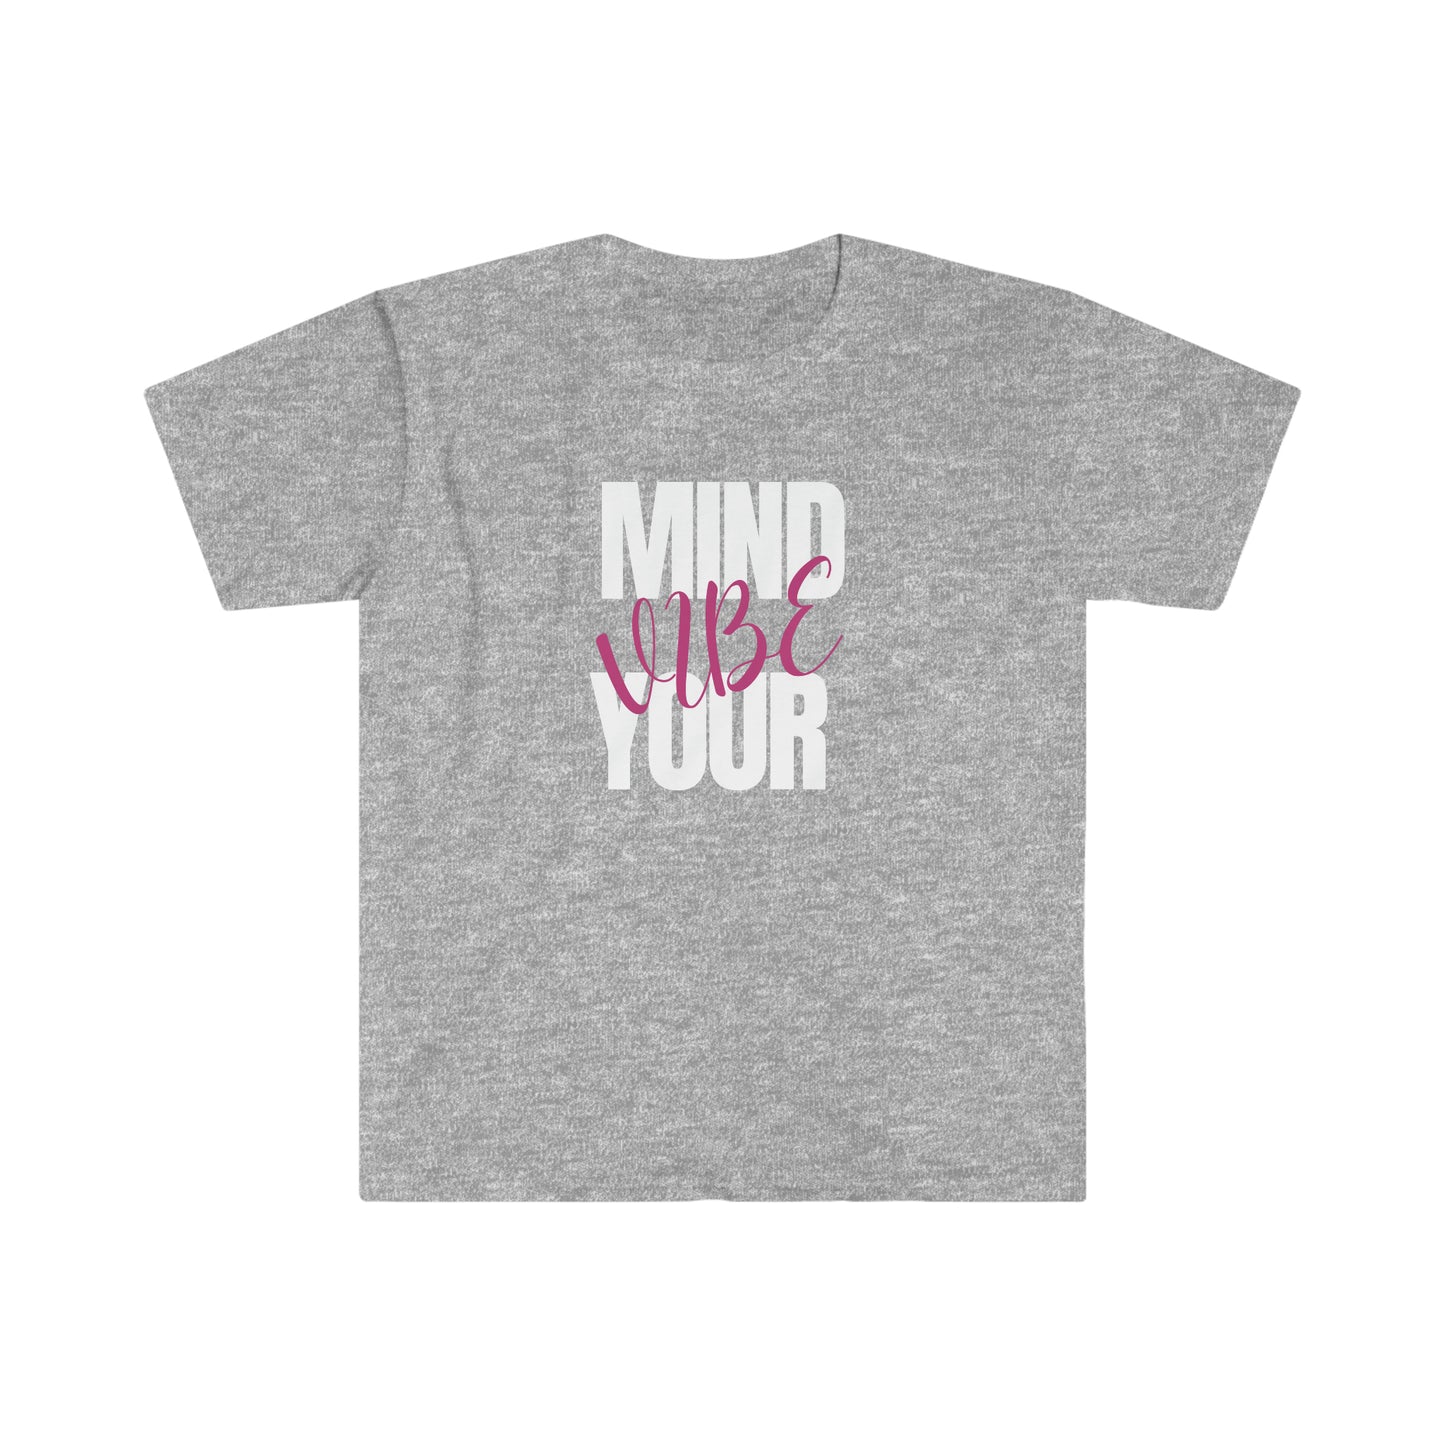 Mind your Vibe! Softstyle T-Shirt